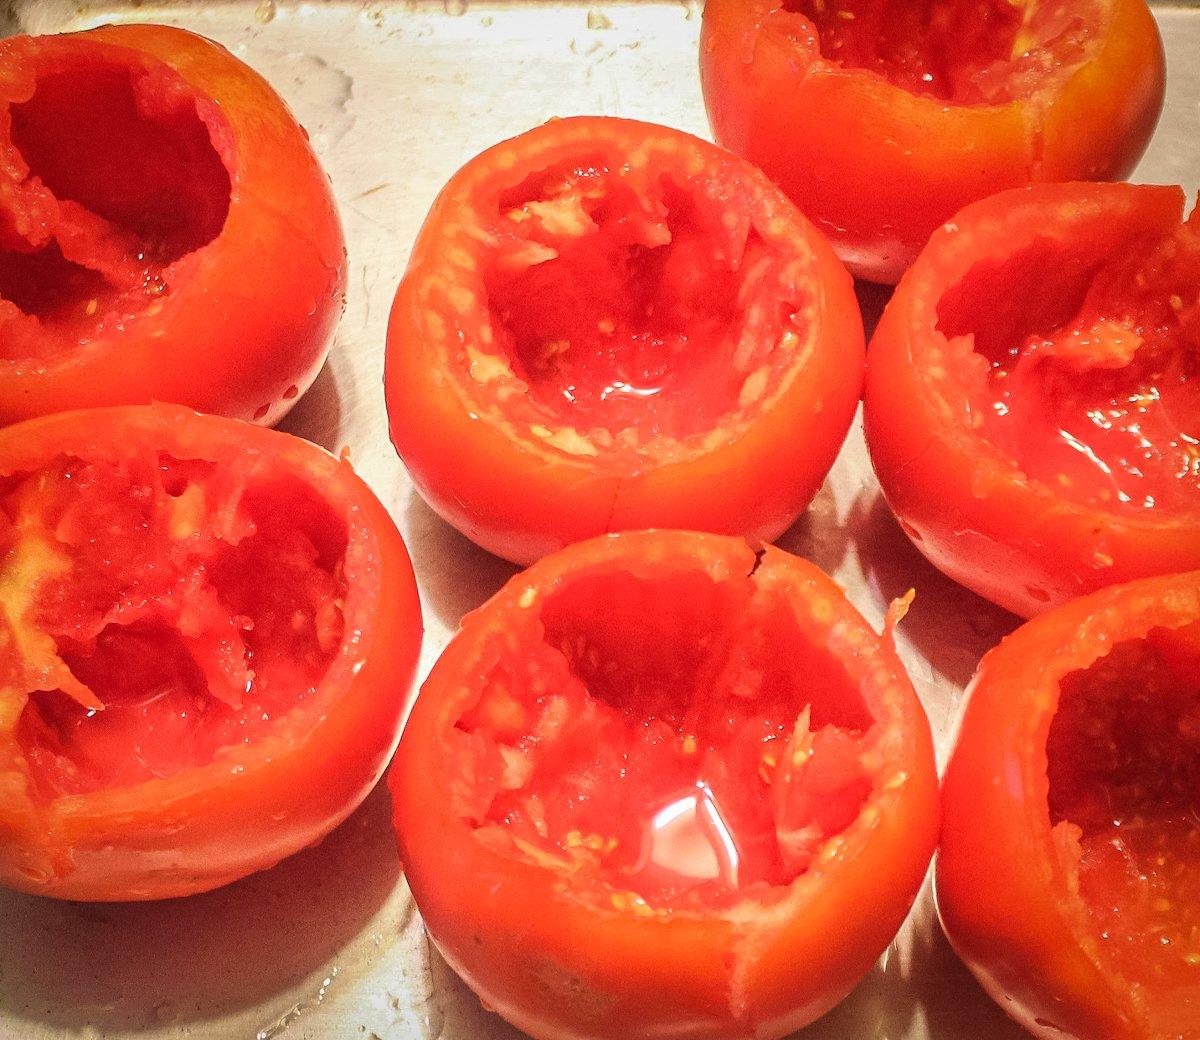 Use a spoon to hollow out the tomatoes into bowls.